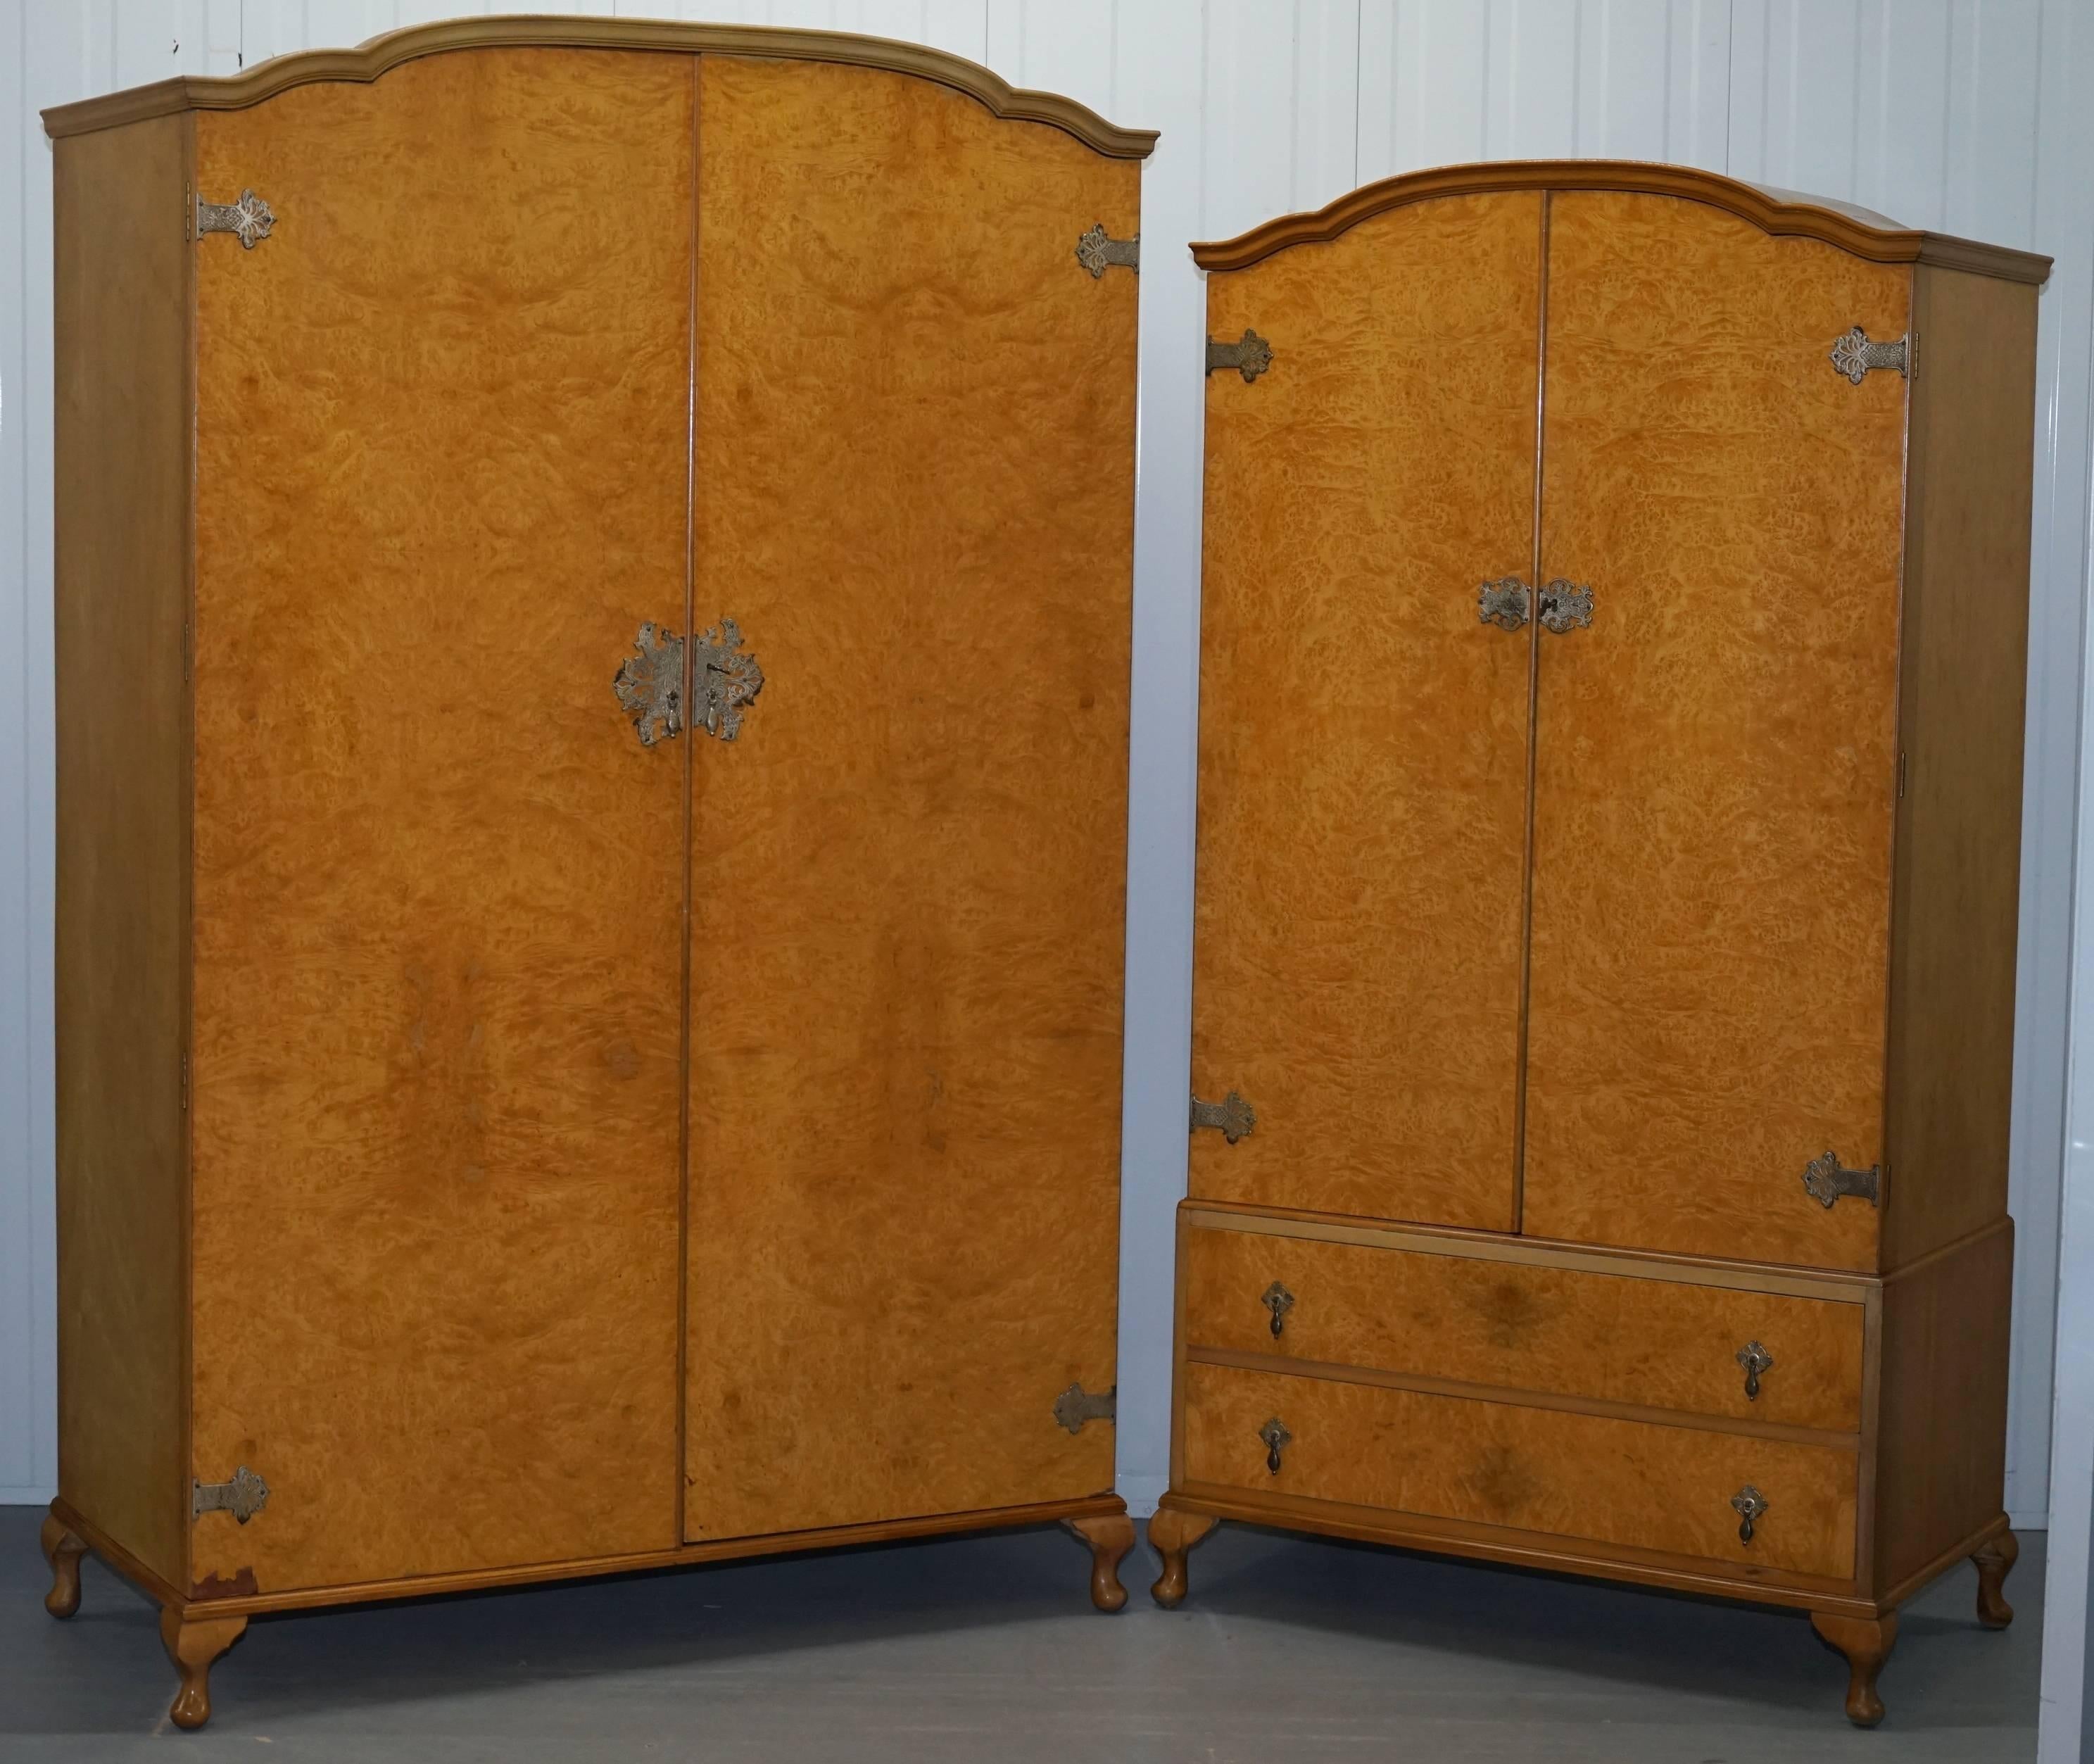 We are delighted to offer for sale one of two Heirloom Furniture Est 1889 burr walnut wardrobes

This auction is for the smaller one with the drawers

Both pieces are in exceptional condition throughout, the burr walnut, is expertly cut and has